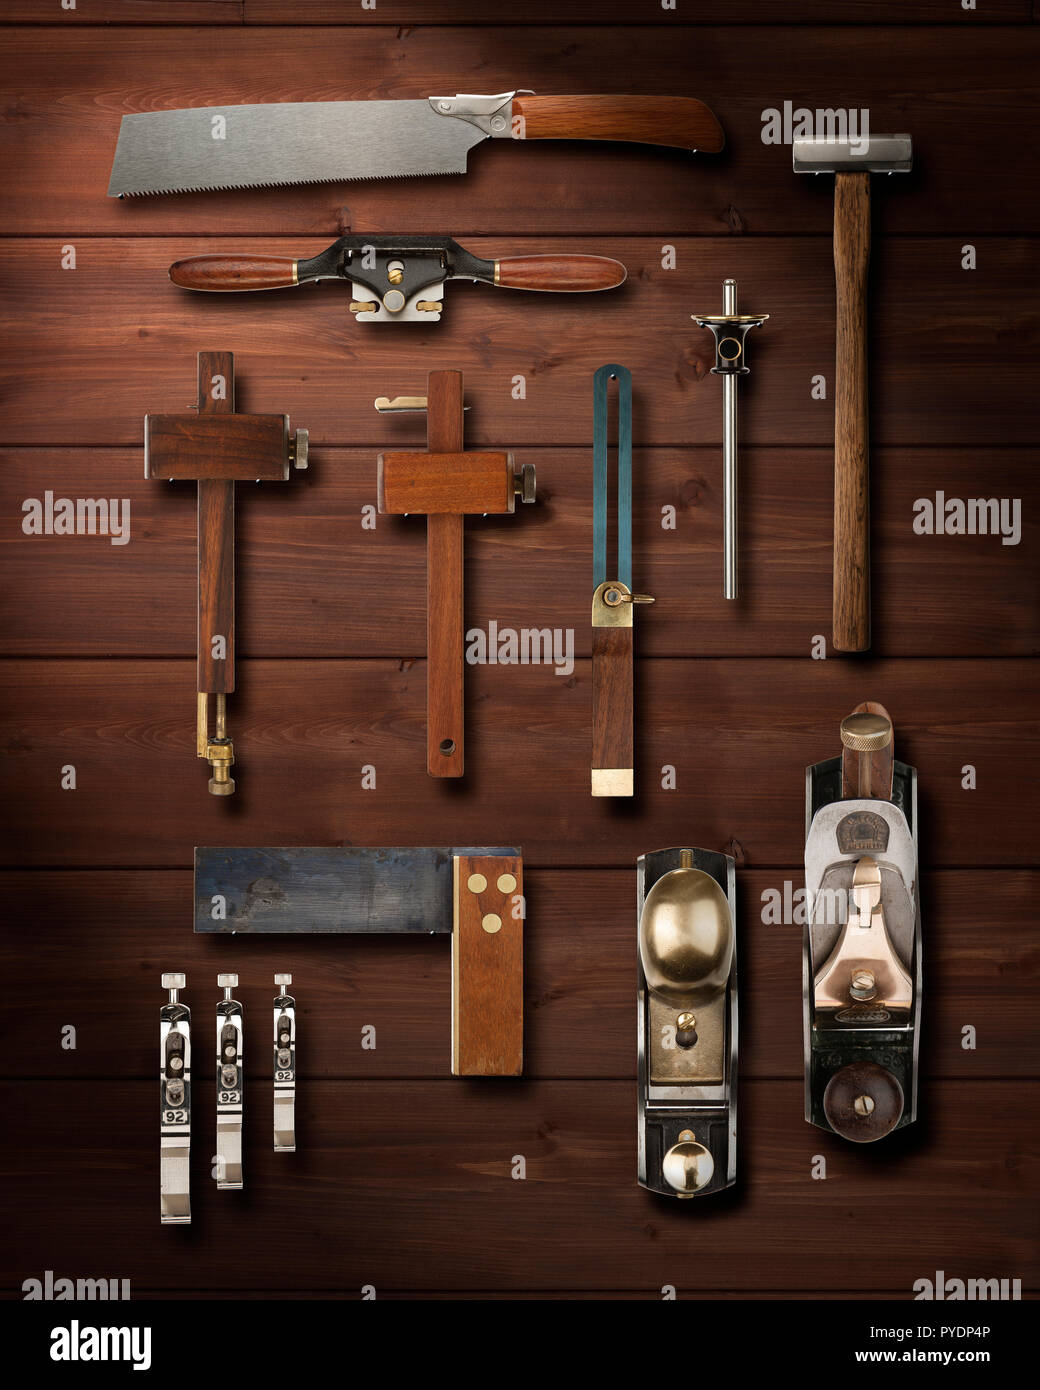 Old School Tools High Resolution Stock Photography and Images - Alamy